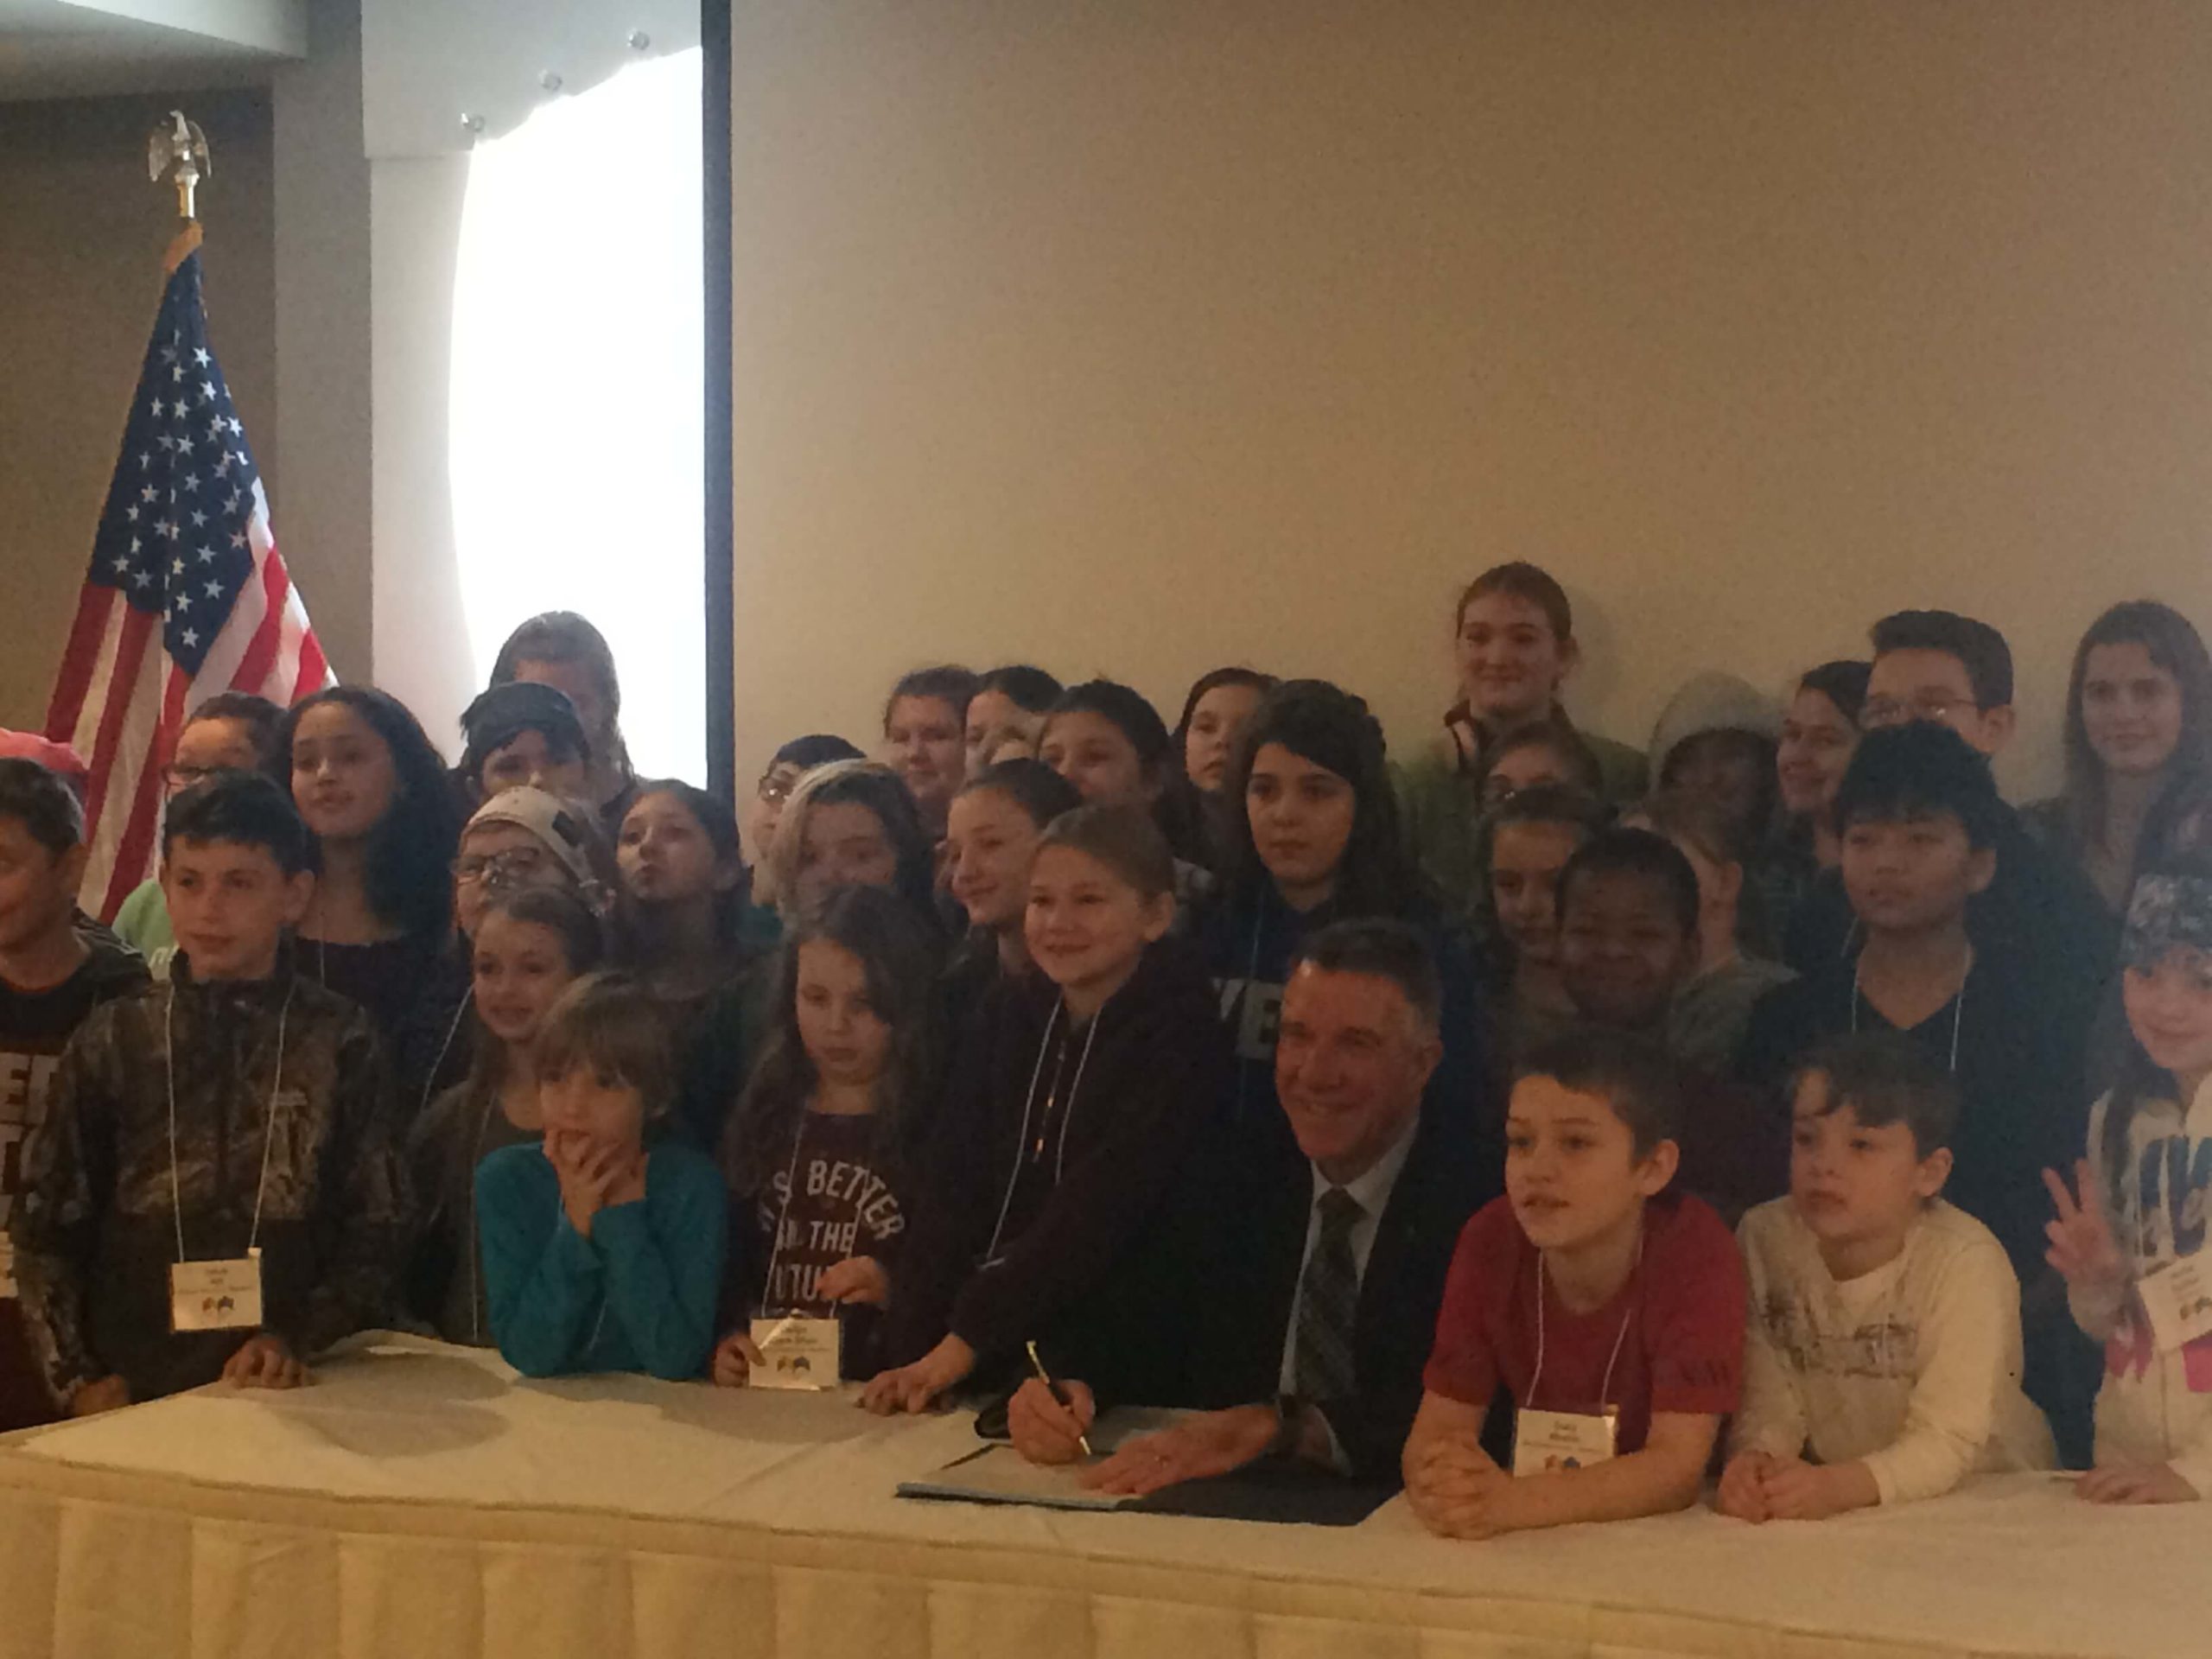 Children posing with Vermont governor Phil Scott as he signs a document